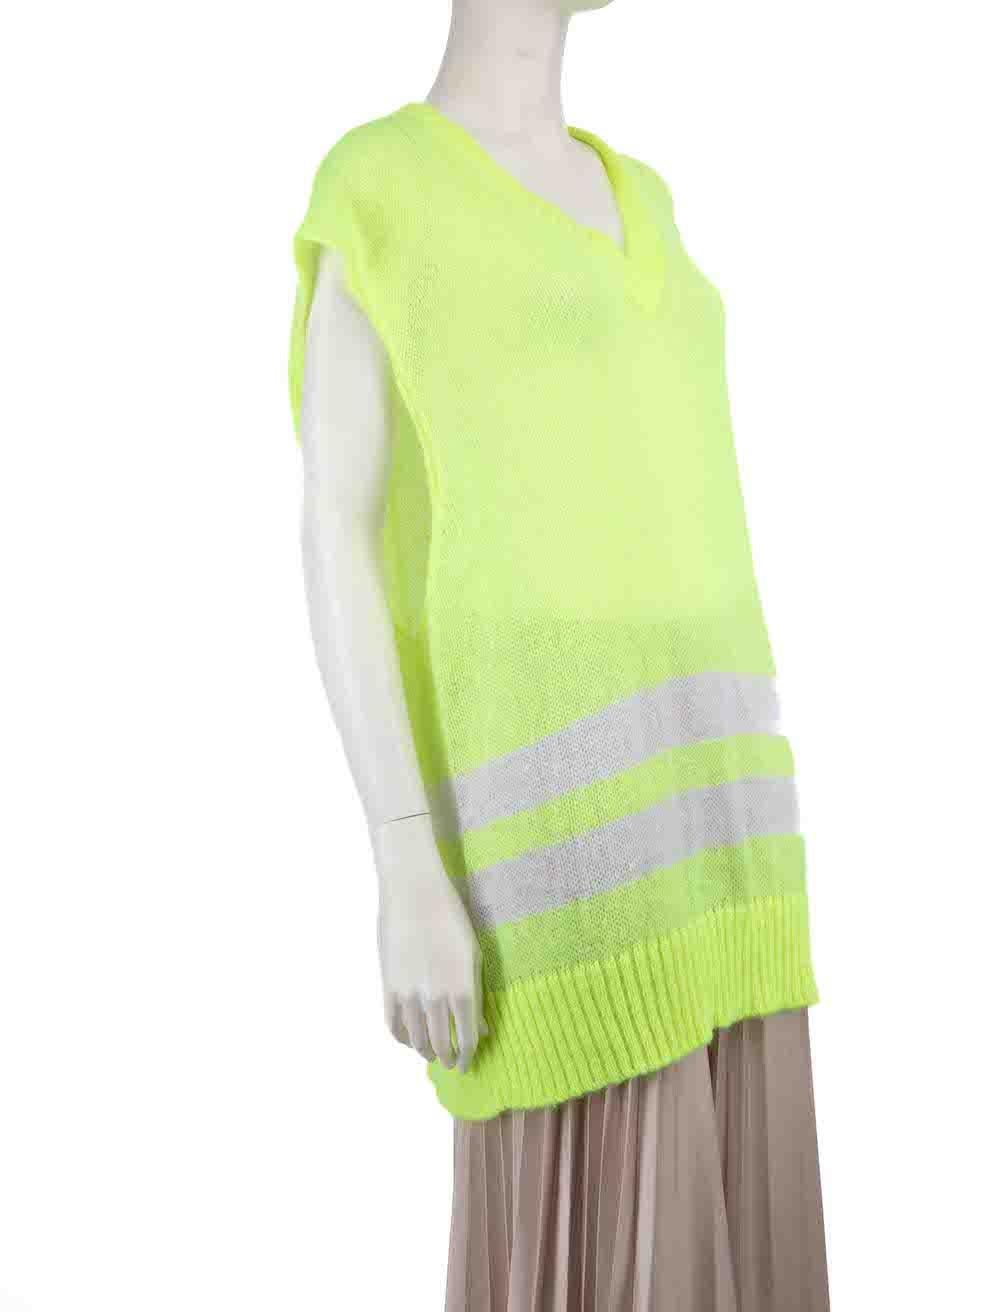 CONDITION is Very good. Minimal wear to jumper is evident. There is a small mark to the back neck on this used Maison Margiela designer resale item.
 
 Details
 Neon yellow
 Synthetic
 Knit vest
 White striped detail
 Oversized fit
 Sheer
 
 
 Made